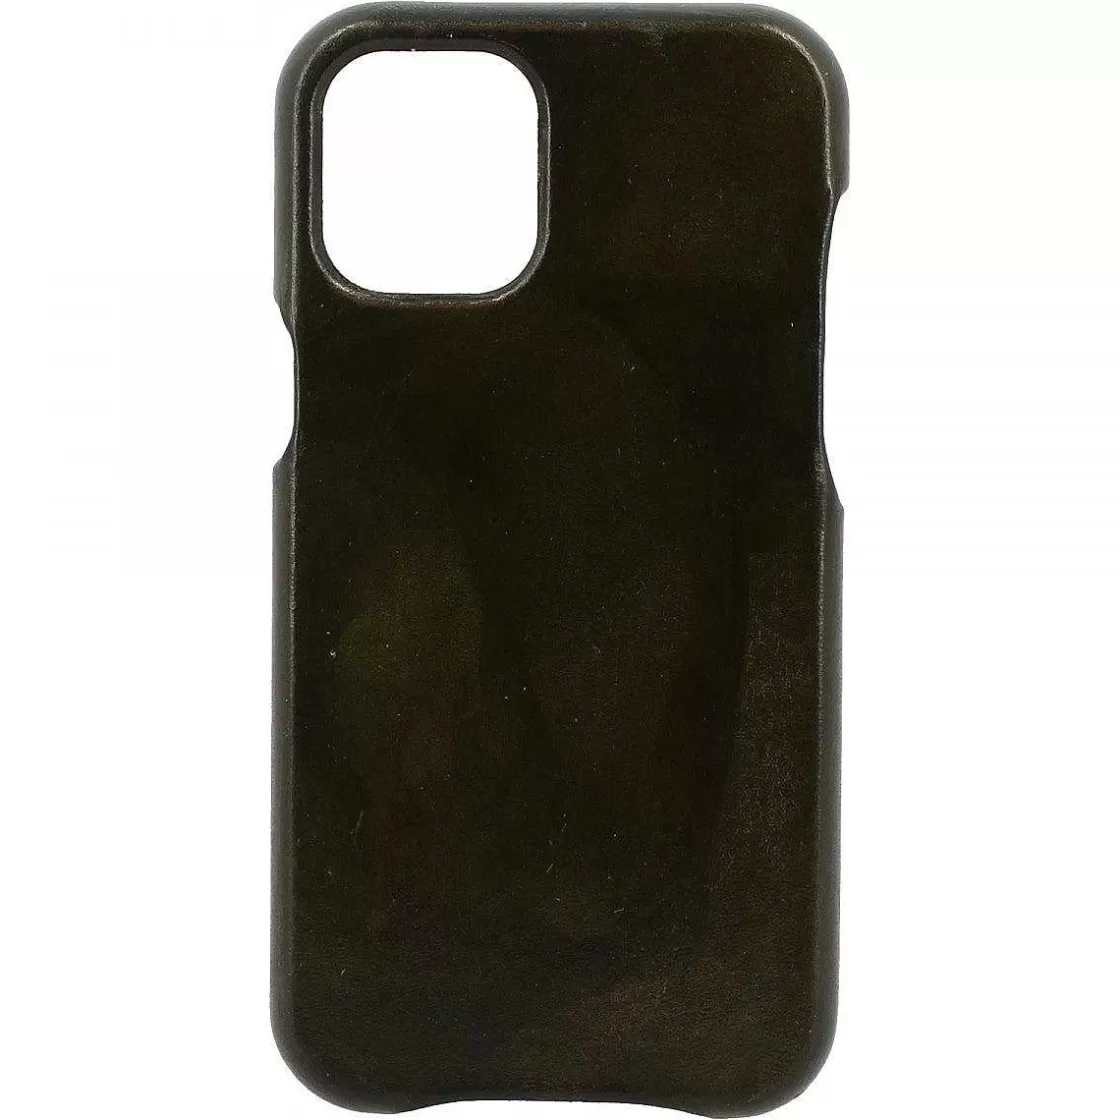 Leonardo Iphone Cover In Hand-Buffered Military Green Leather Cheap